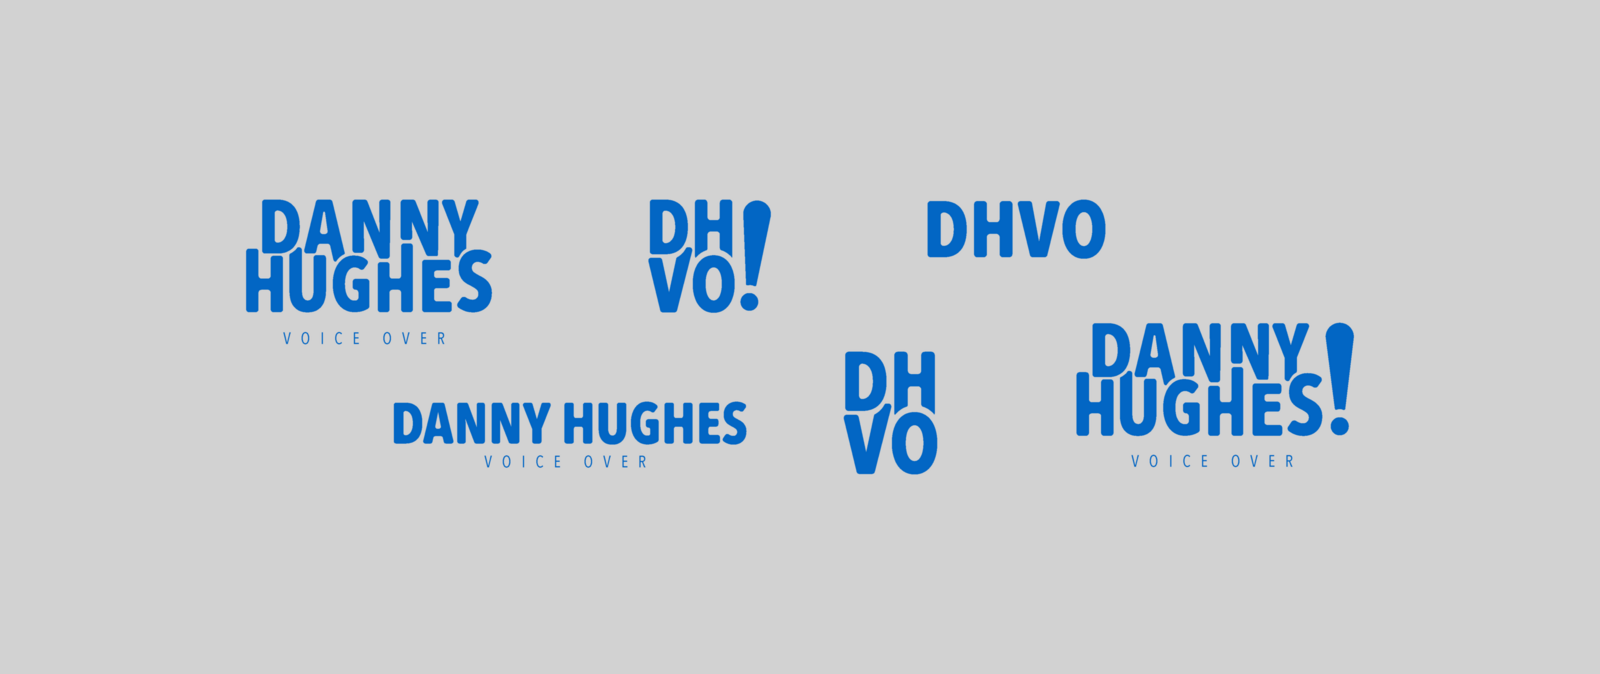 Collage of logos for Danny Hughes VO